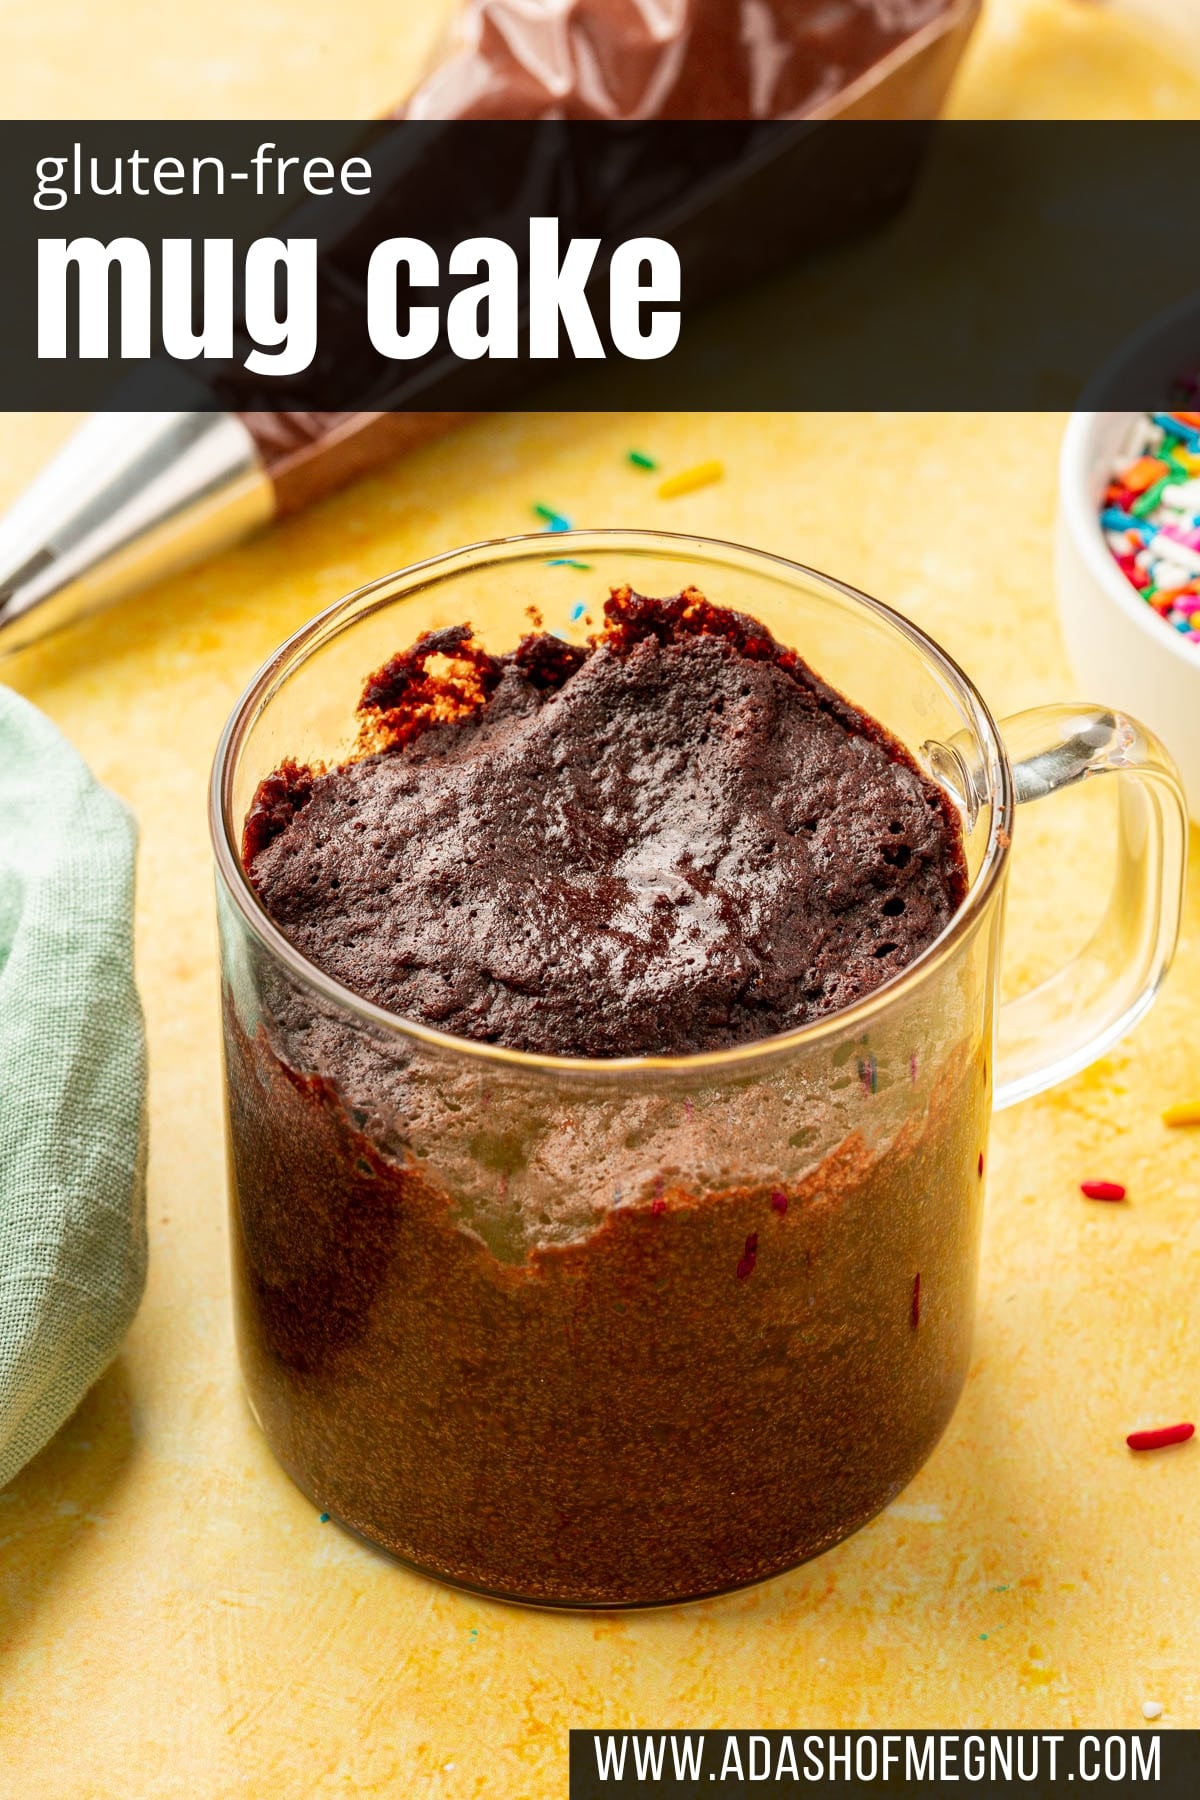 A glass mug of gluten-free chocolate mug cake with a piping bag of chocolate buttercream in the background.